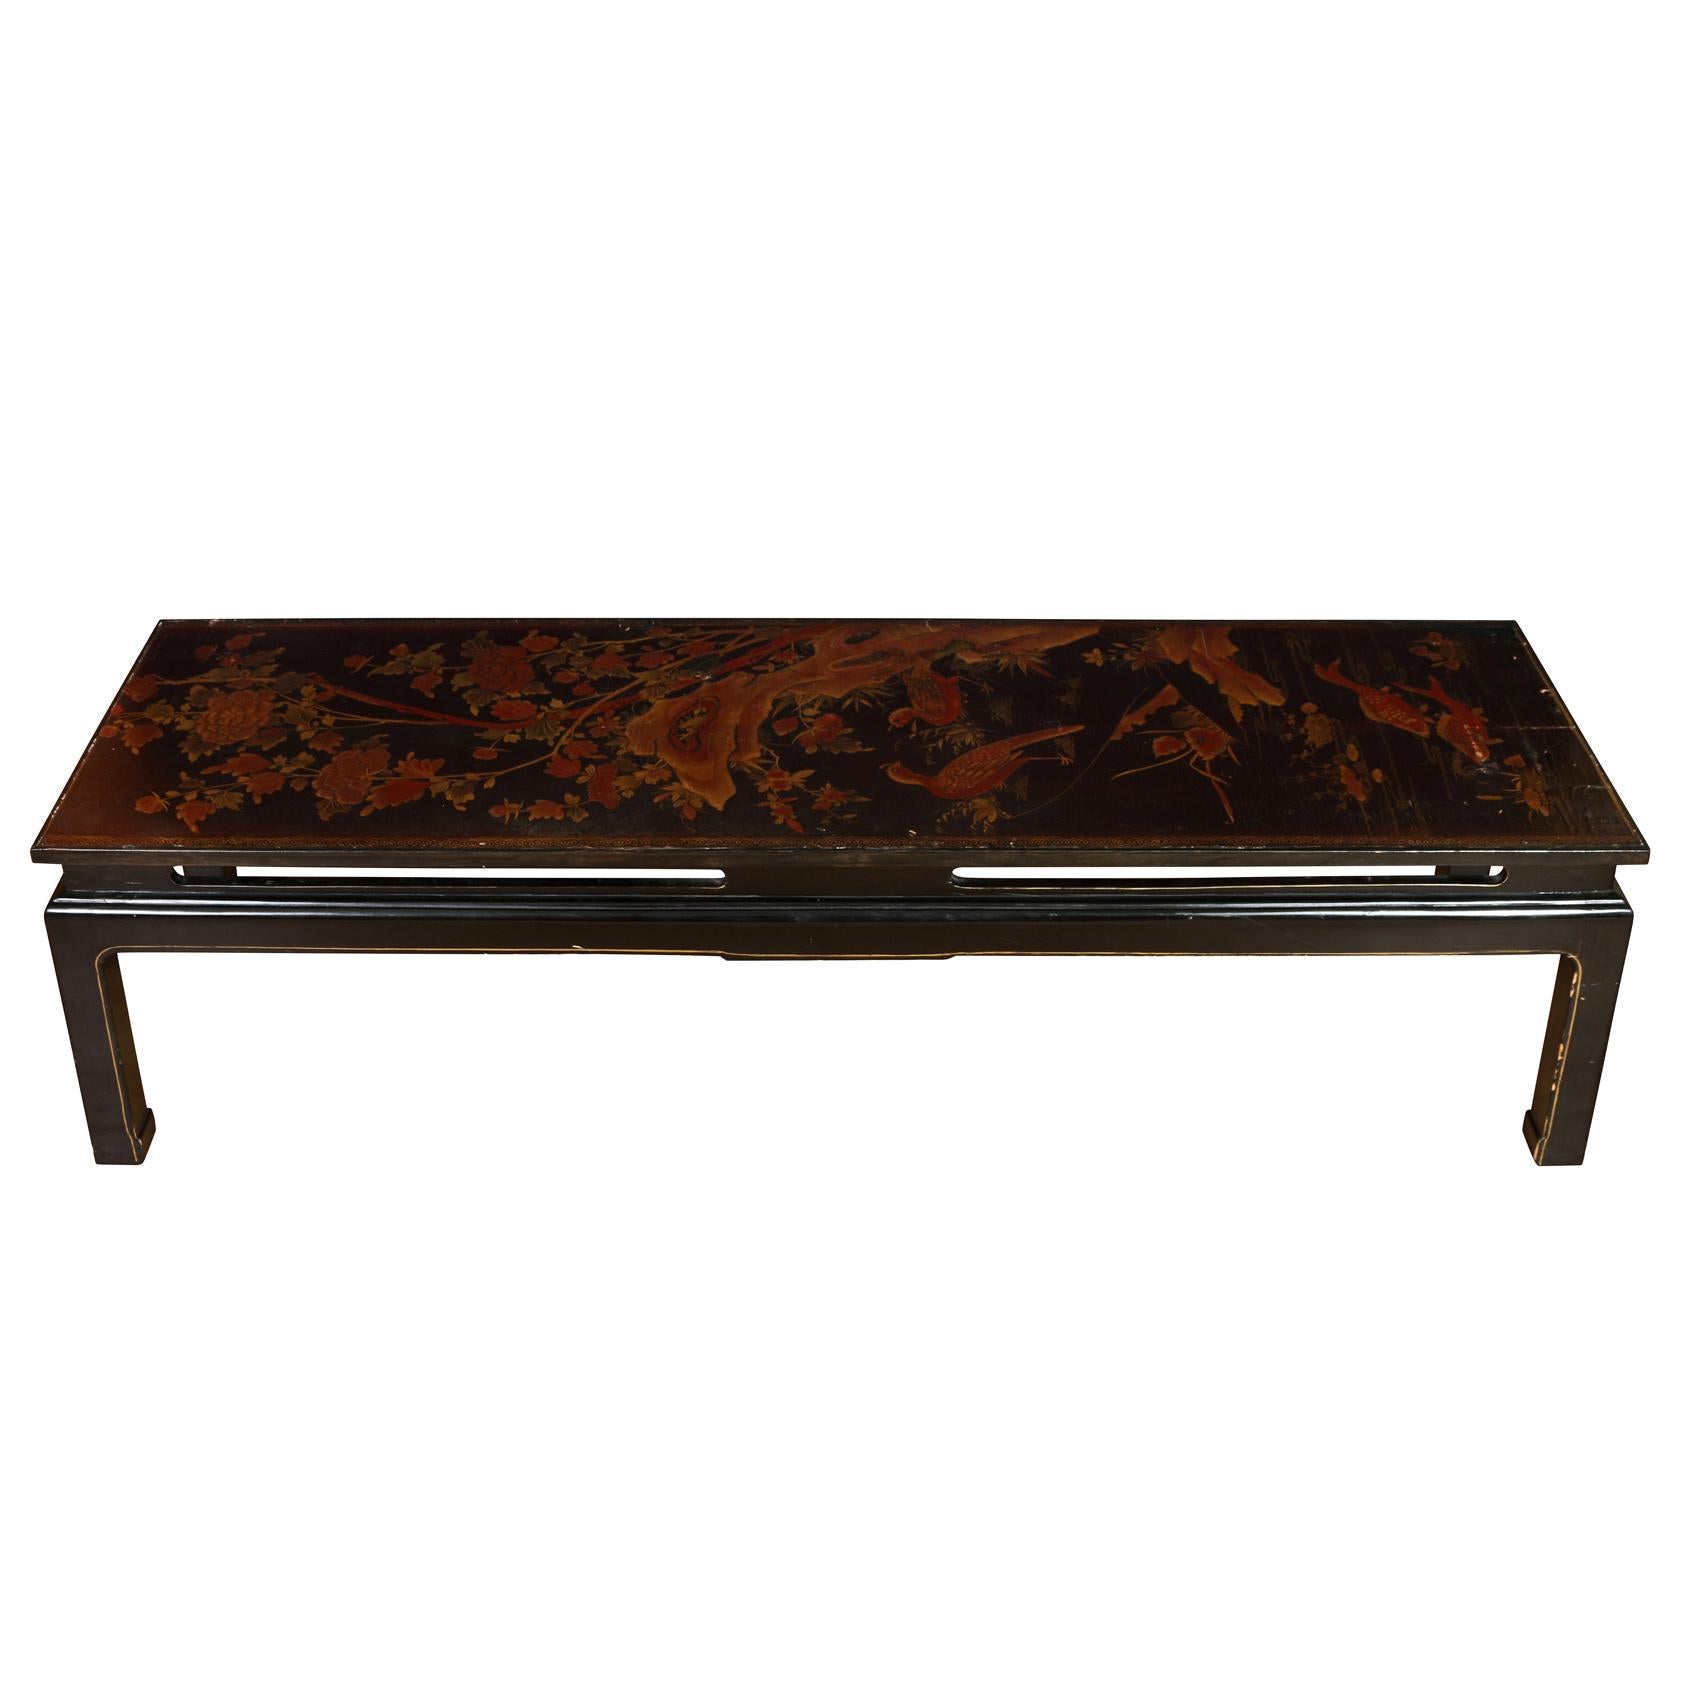 A Chinese lacquer coffee table with parcel gilt decoration including branches, flowers, birds and fish.  Underside of table is also painted with Asian scenery